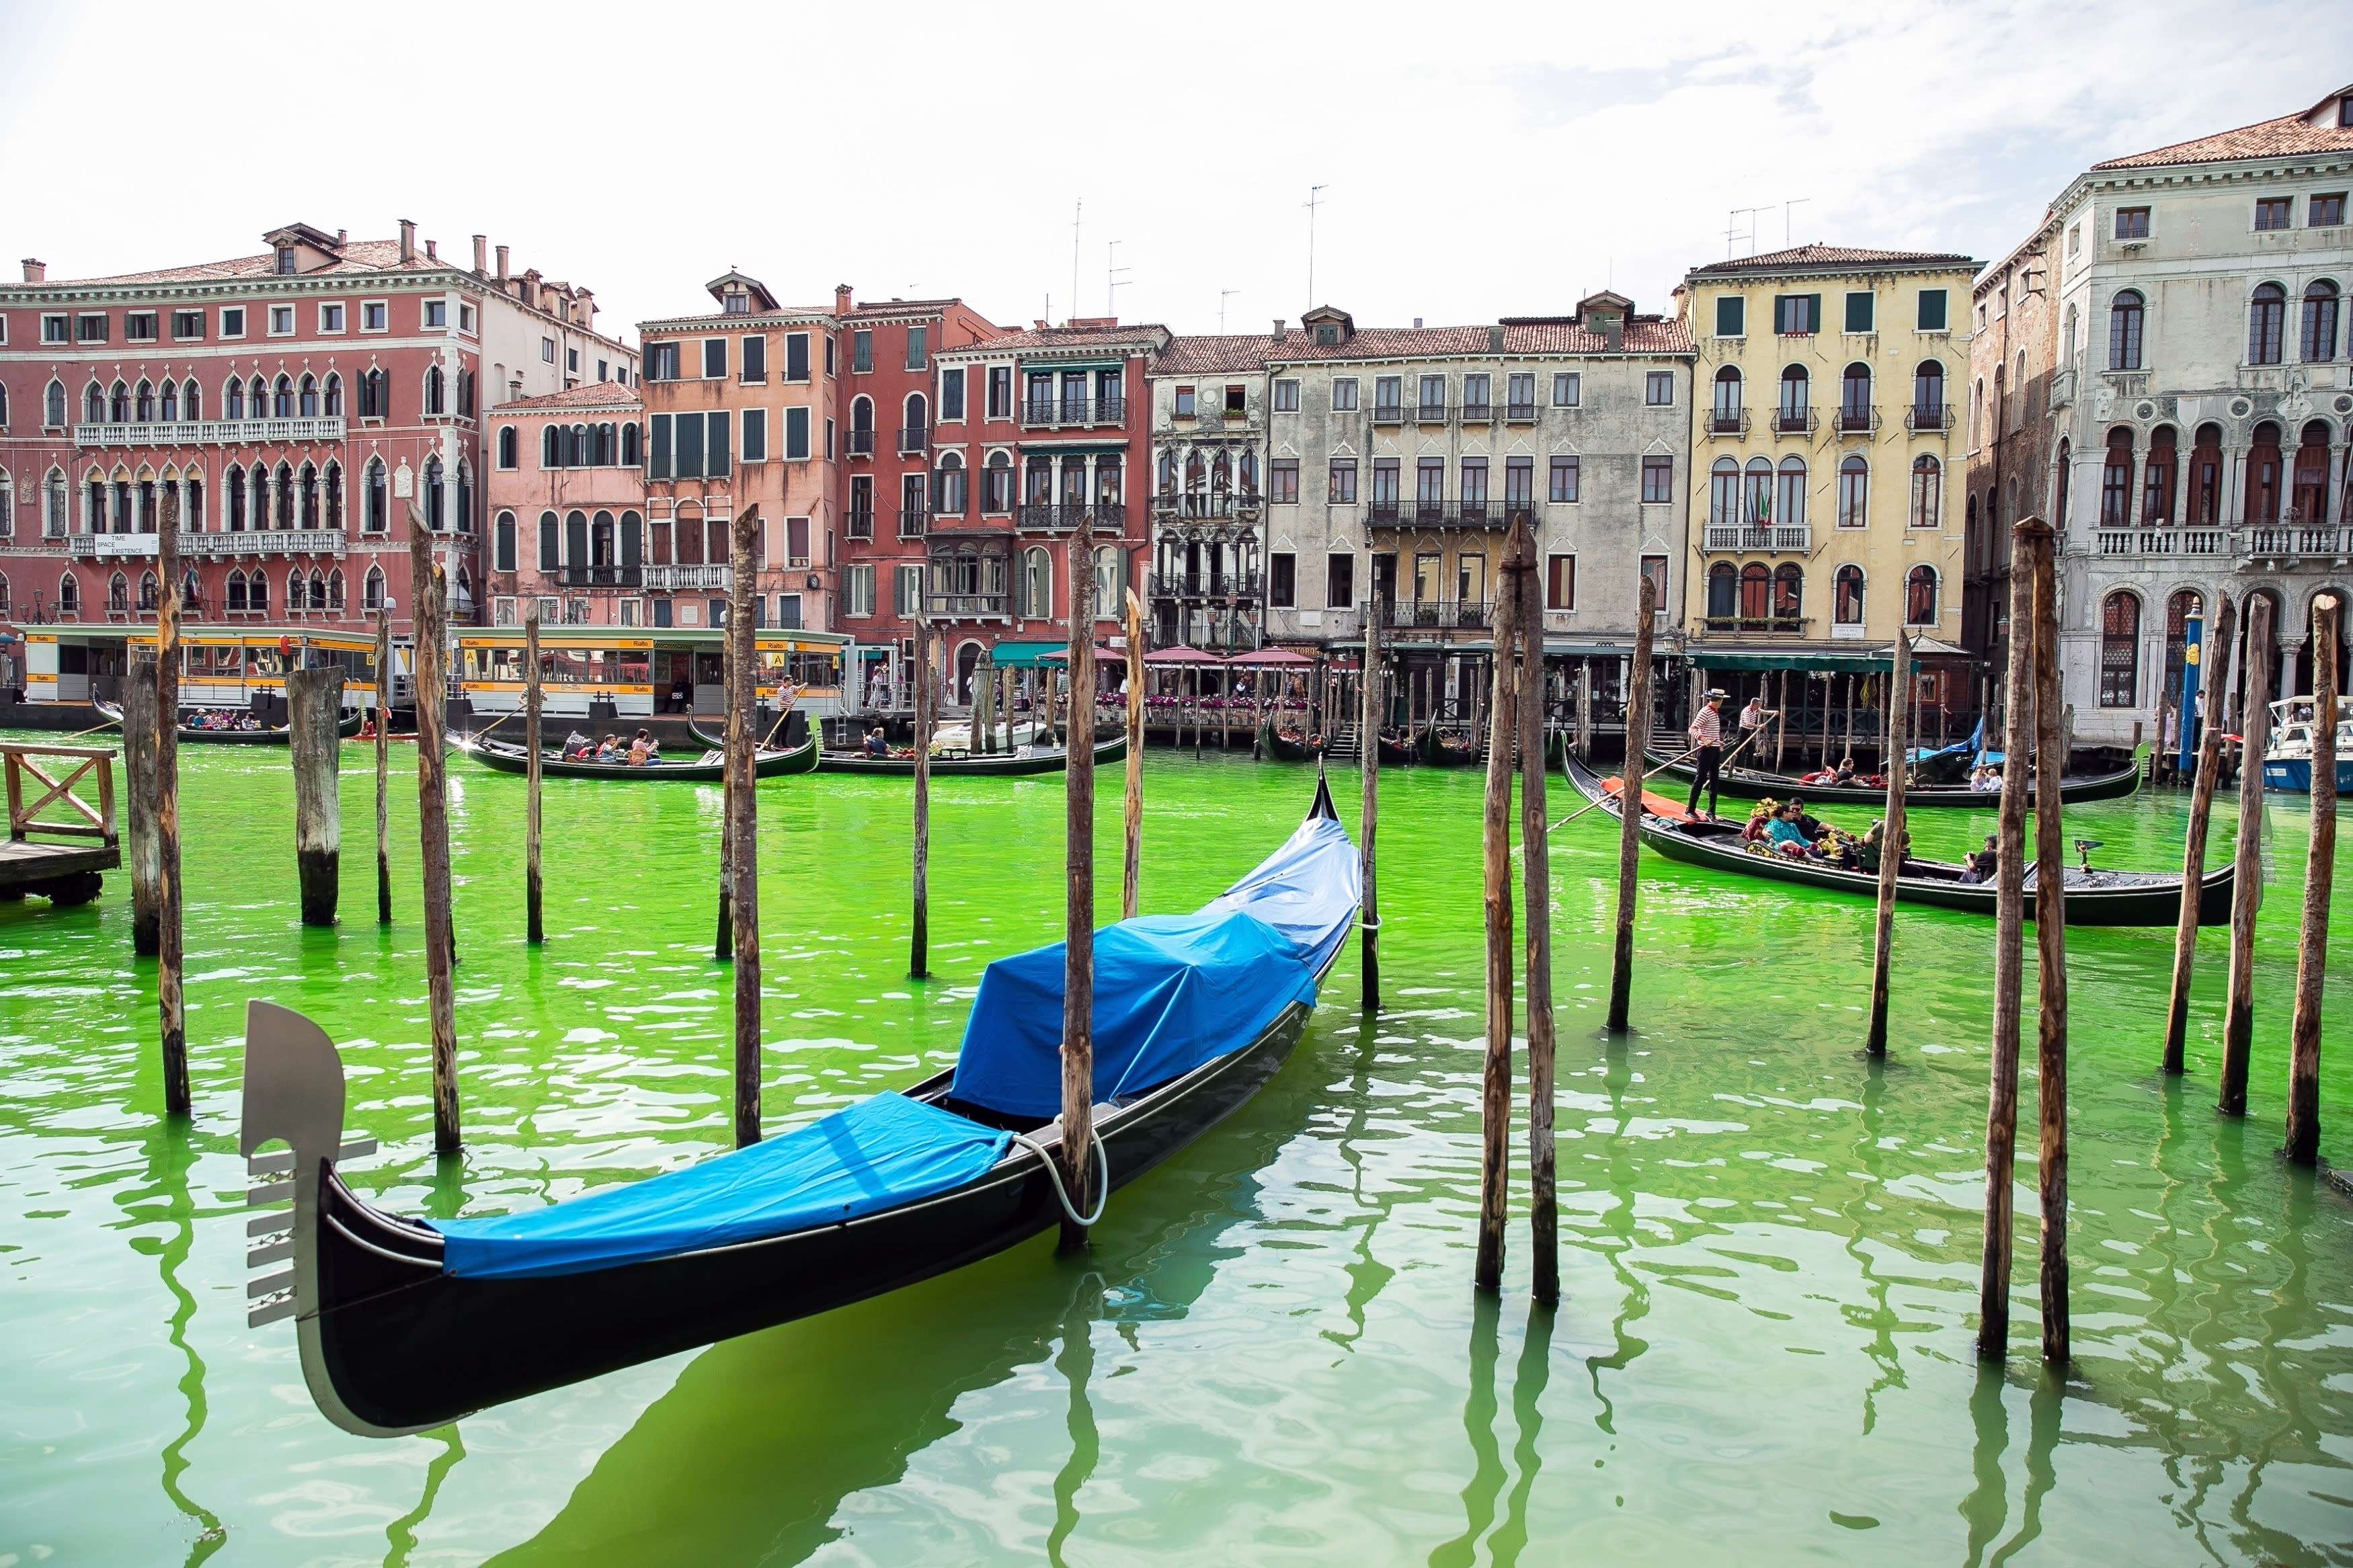 The canal in Venice changes to Käärijä green